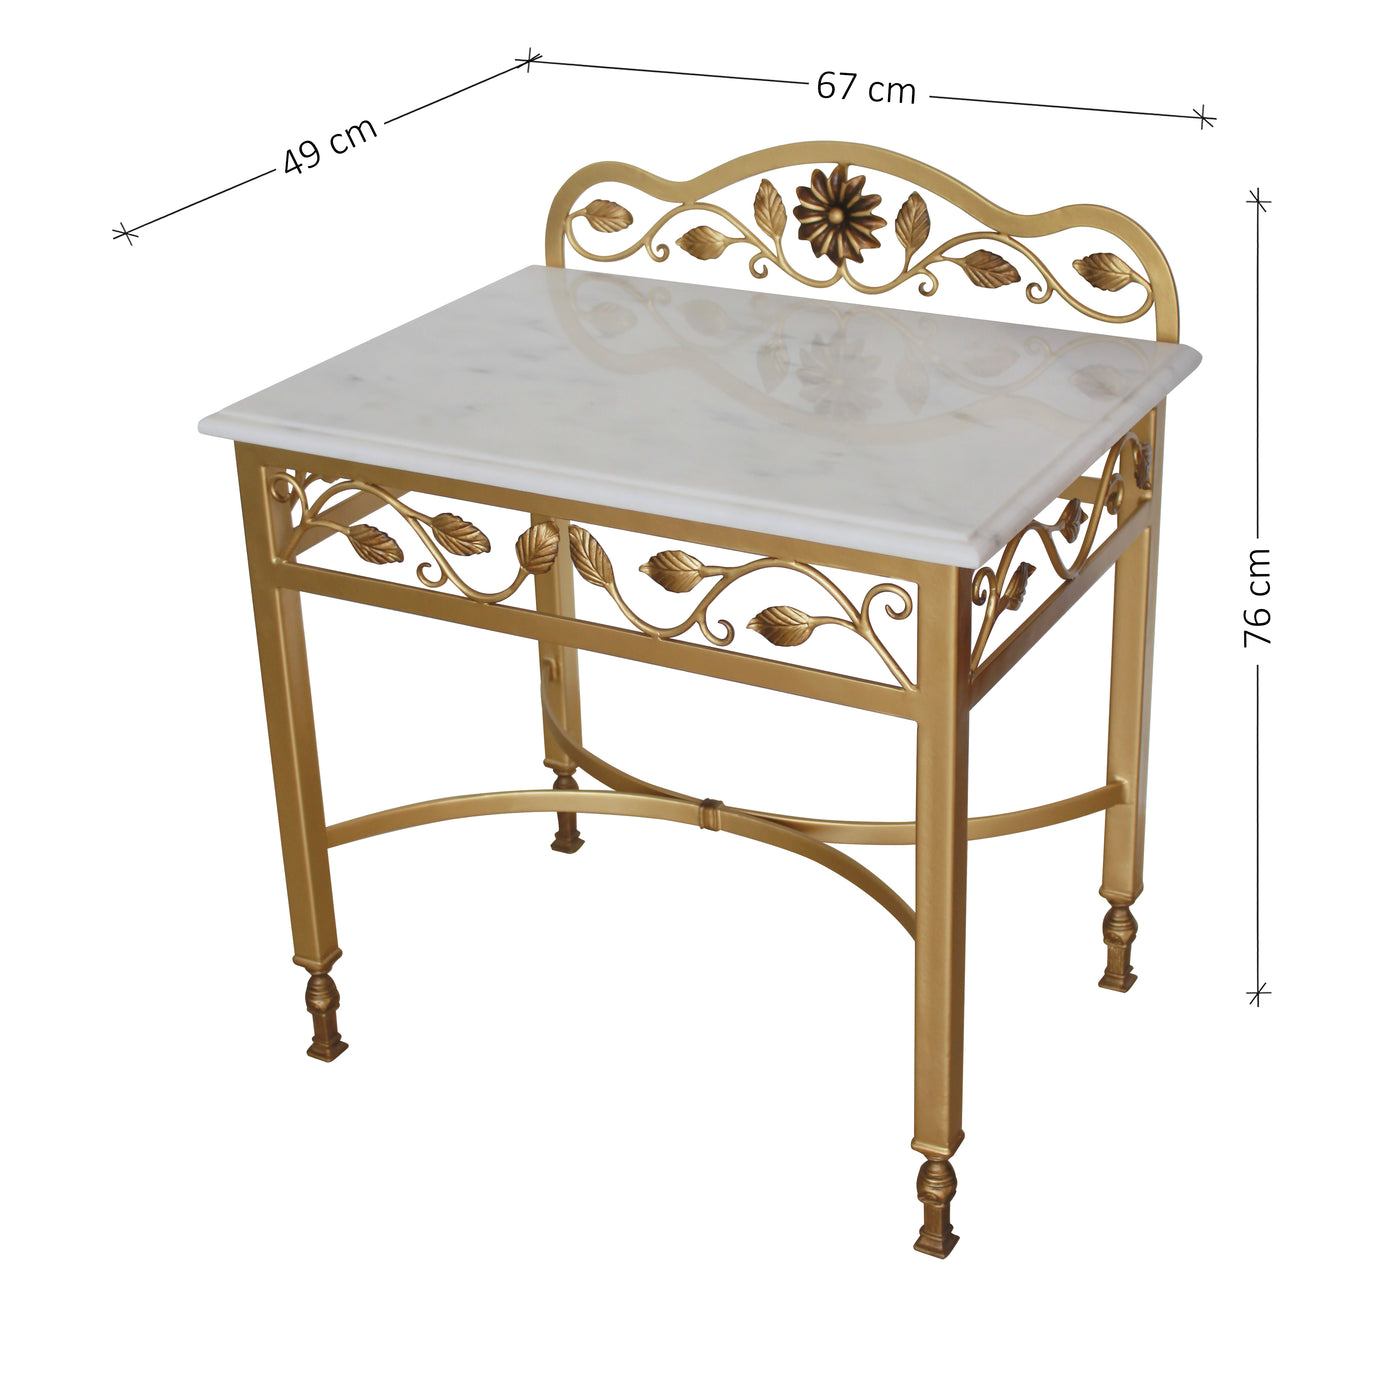 A classical wrought iron nightstand with annotated dimensions